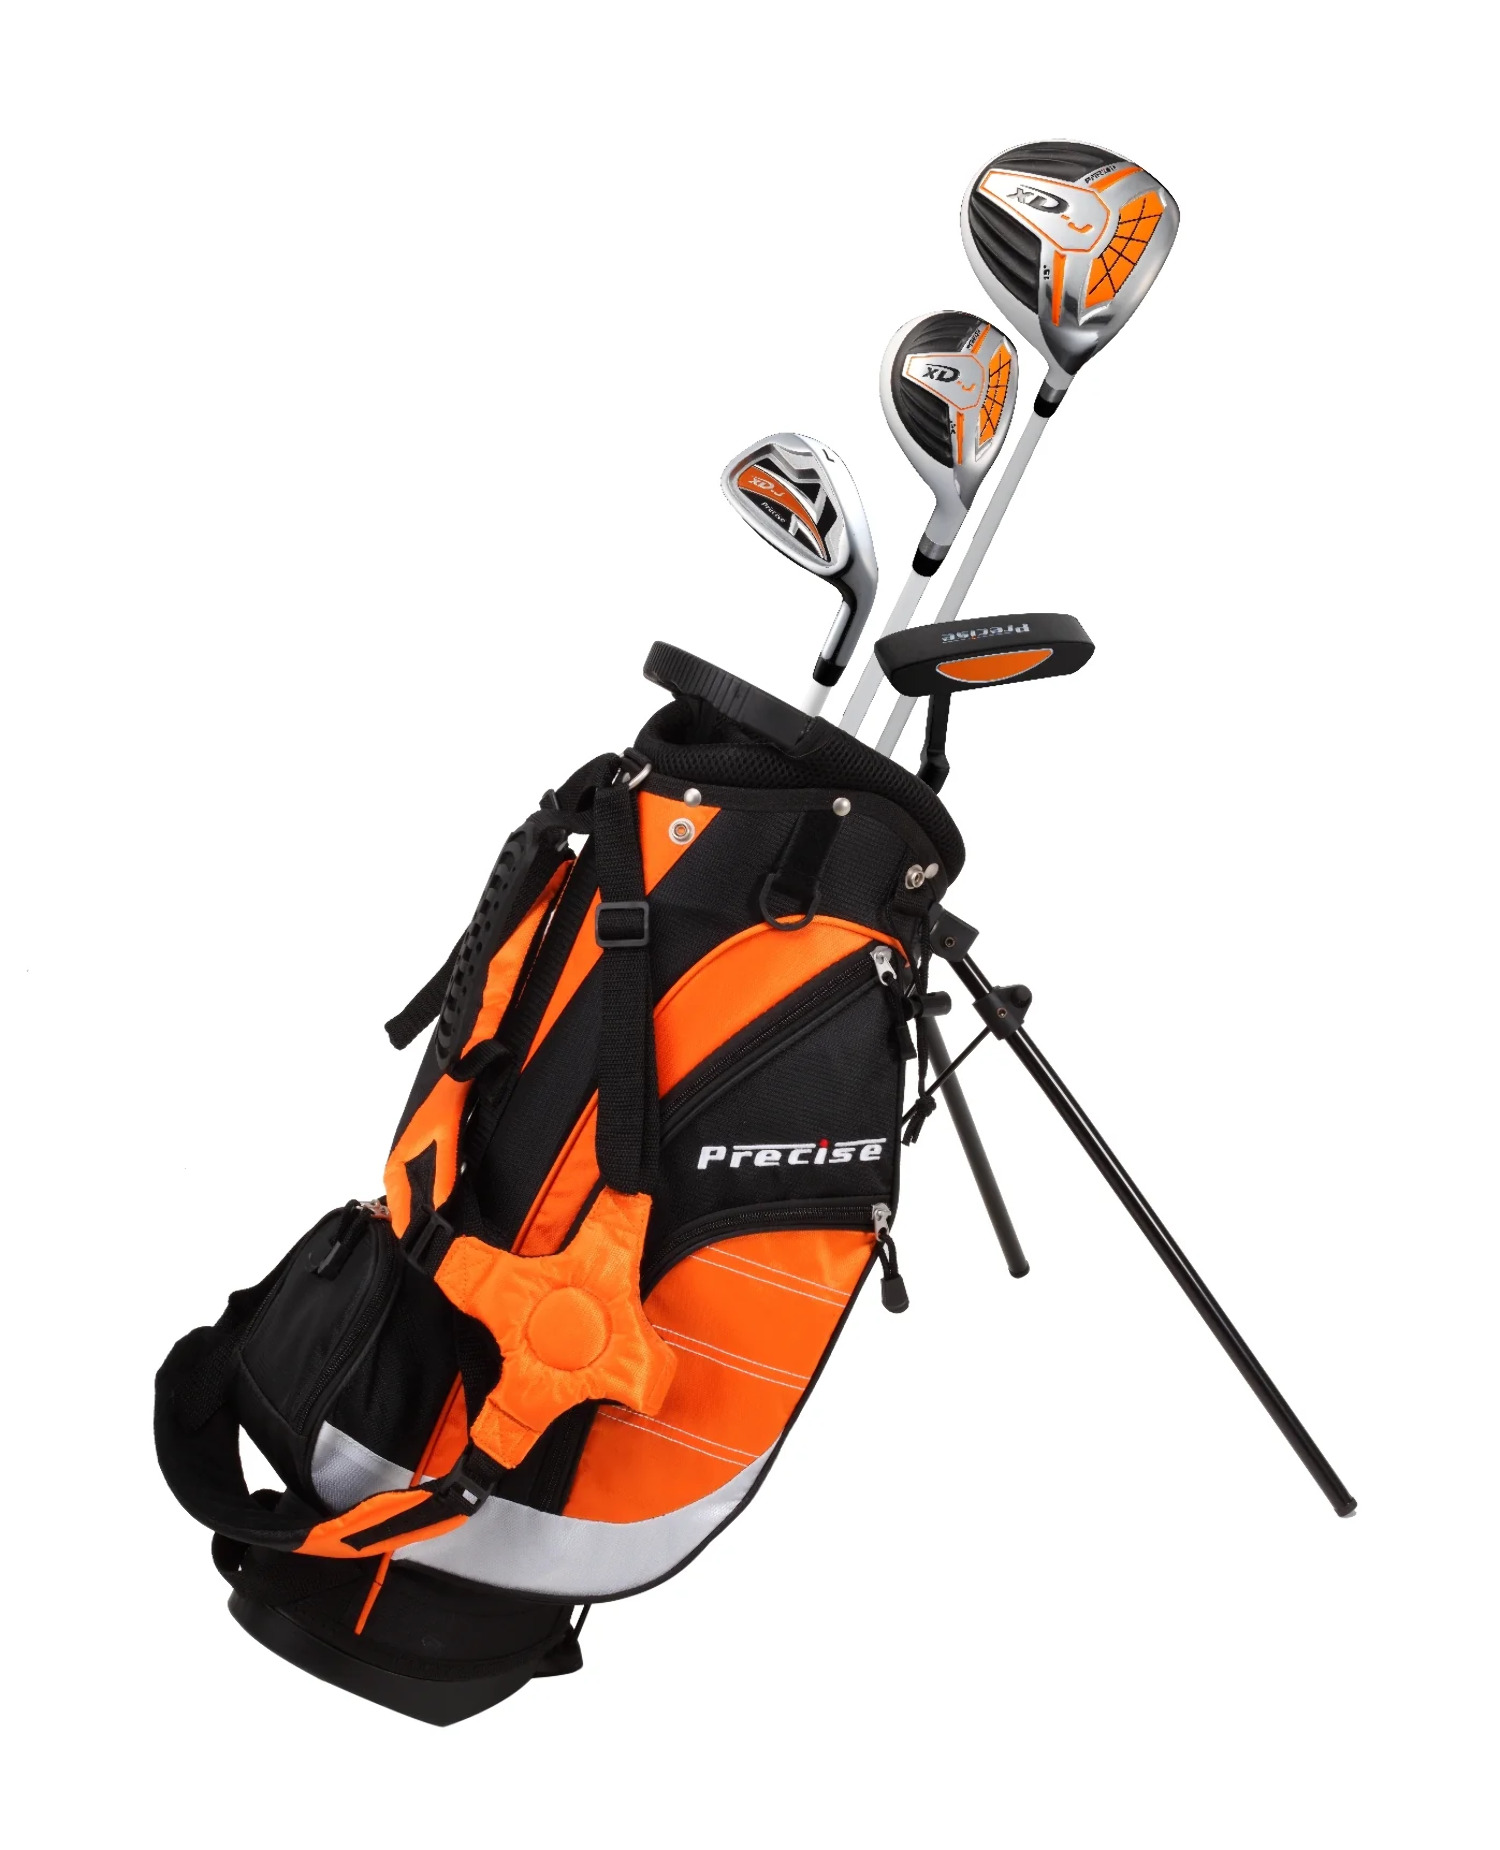 Precise XD-J Junior Complete Golf Club Set for Children Kids - 3 Age Groups Boys & Girls - Right Hand & Left Hand! - image 2 of 11